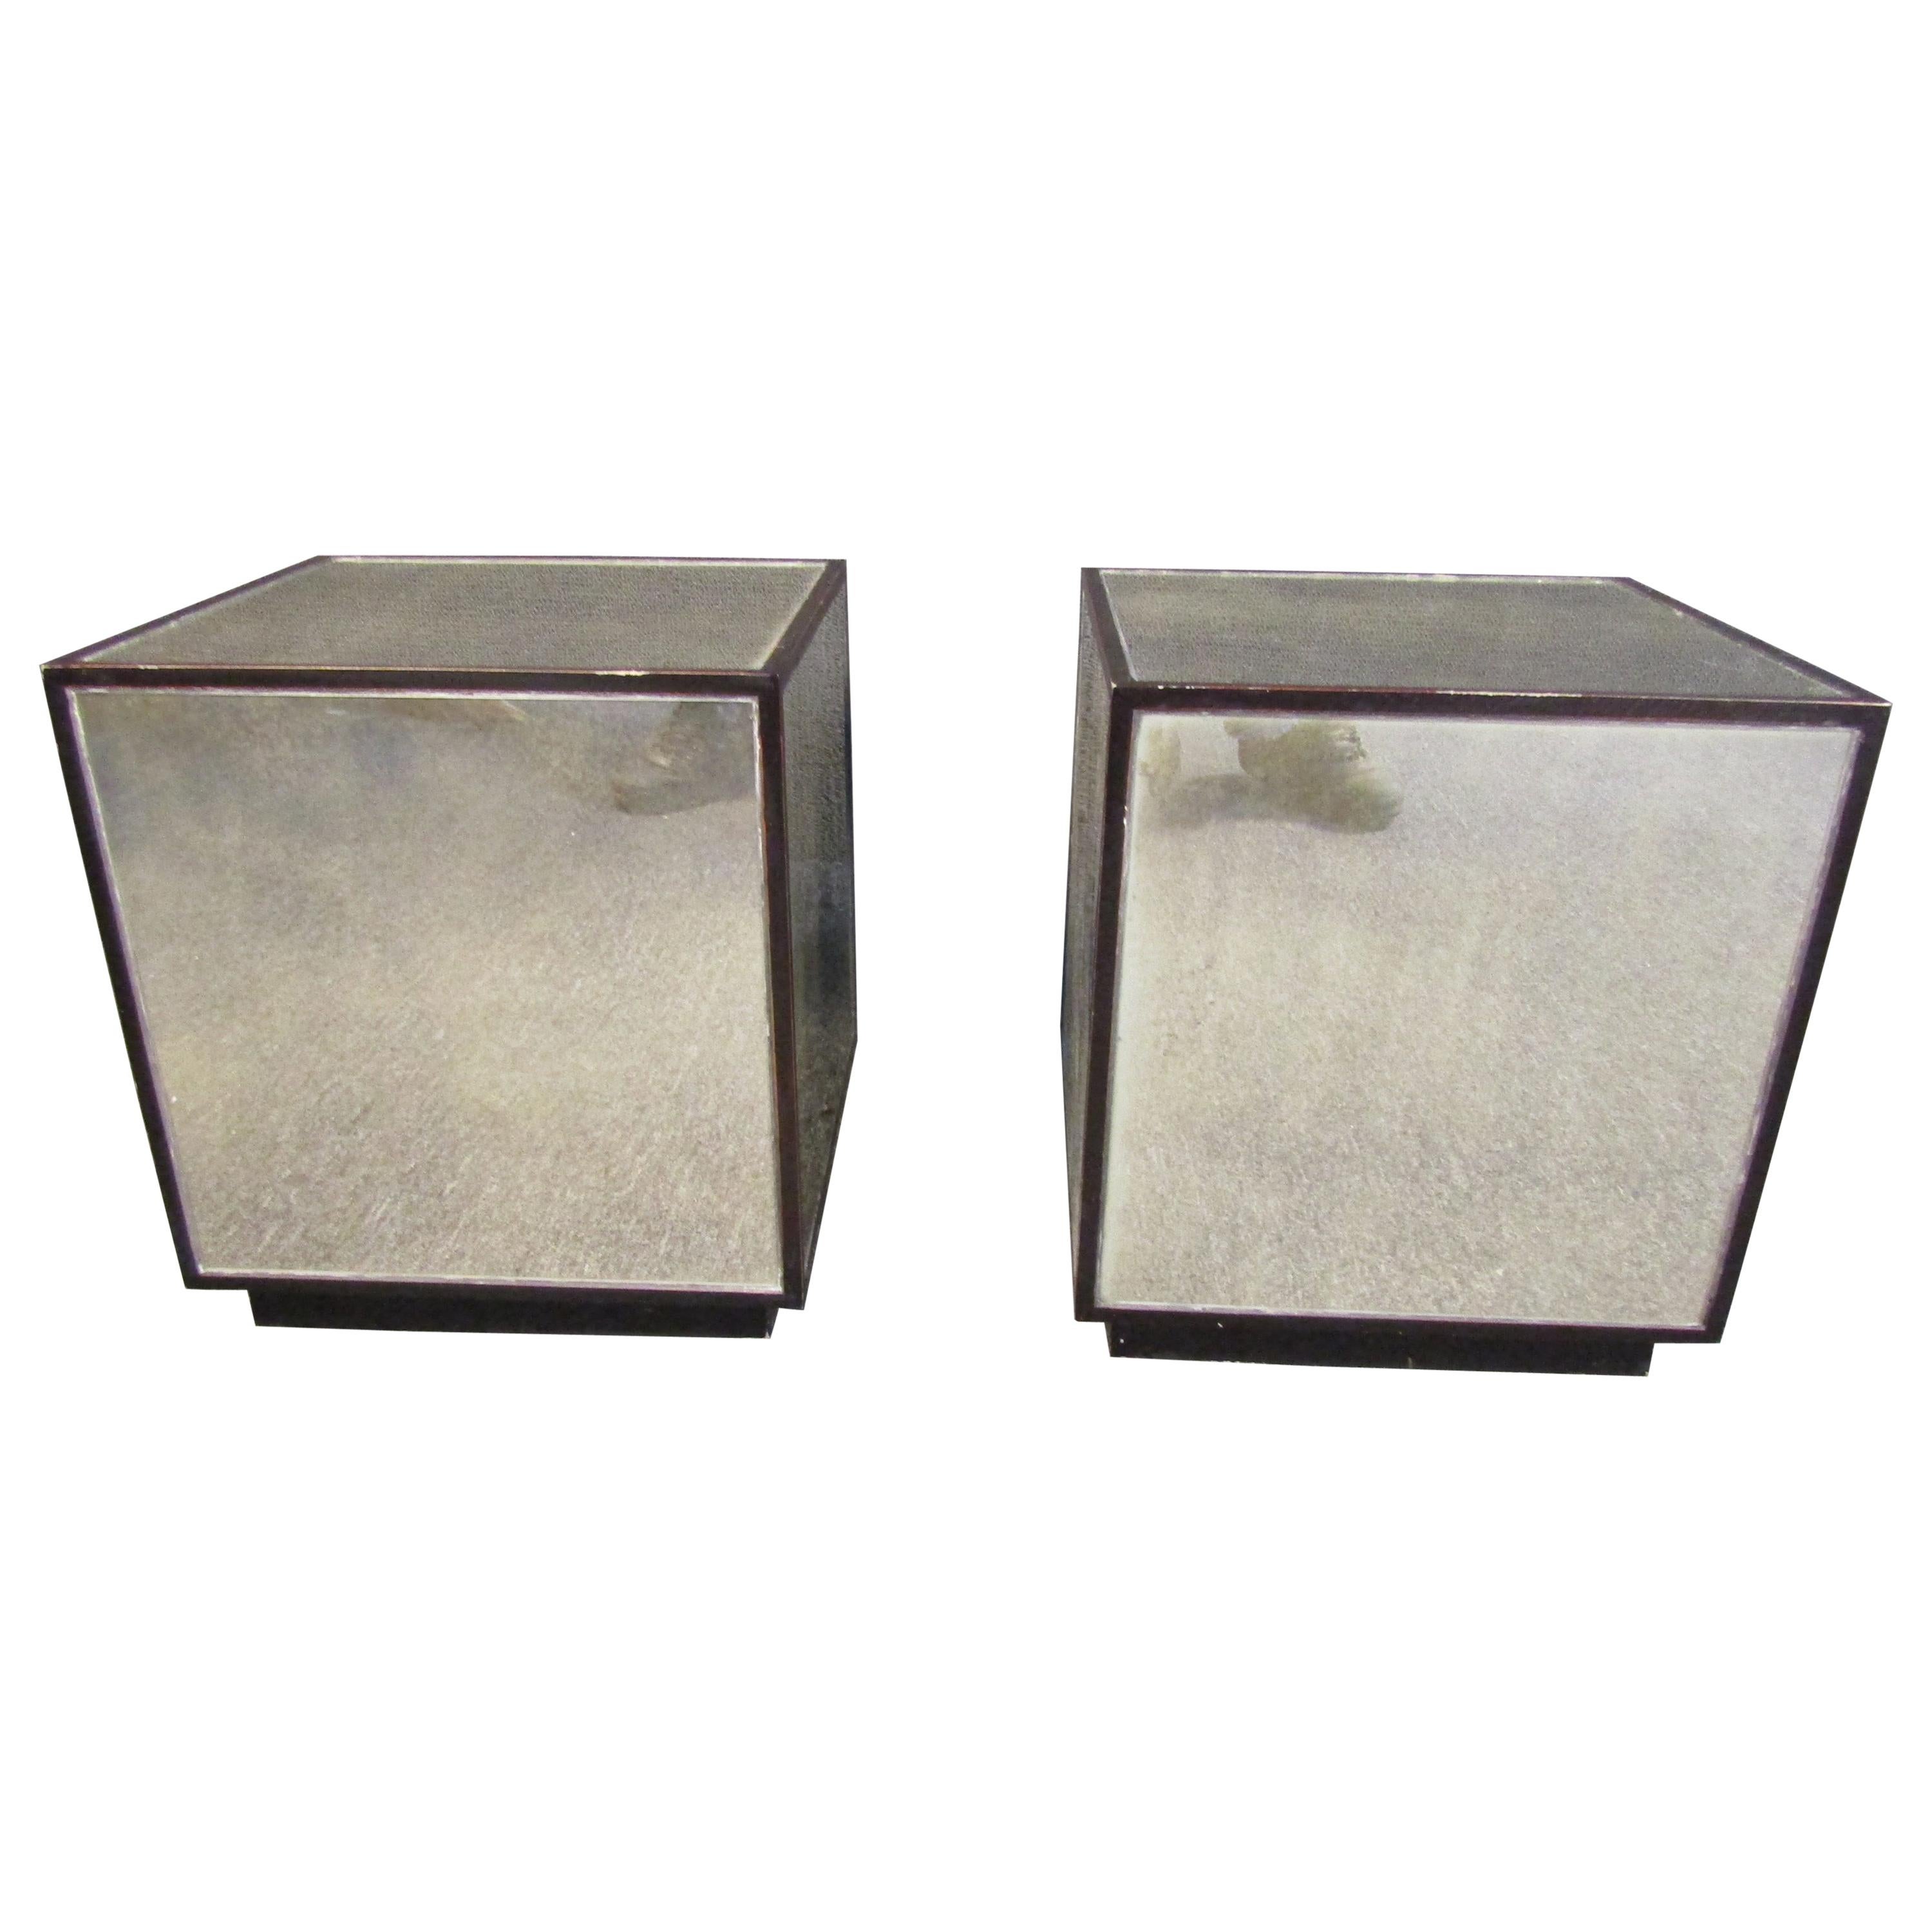 Pair of Cube-Shaped Mirror End Tables